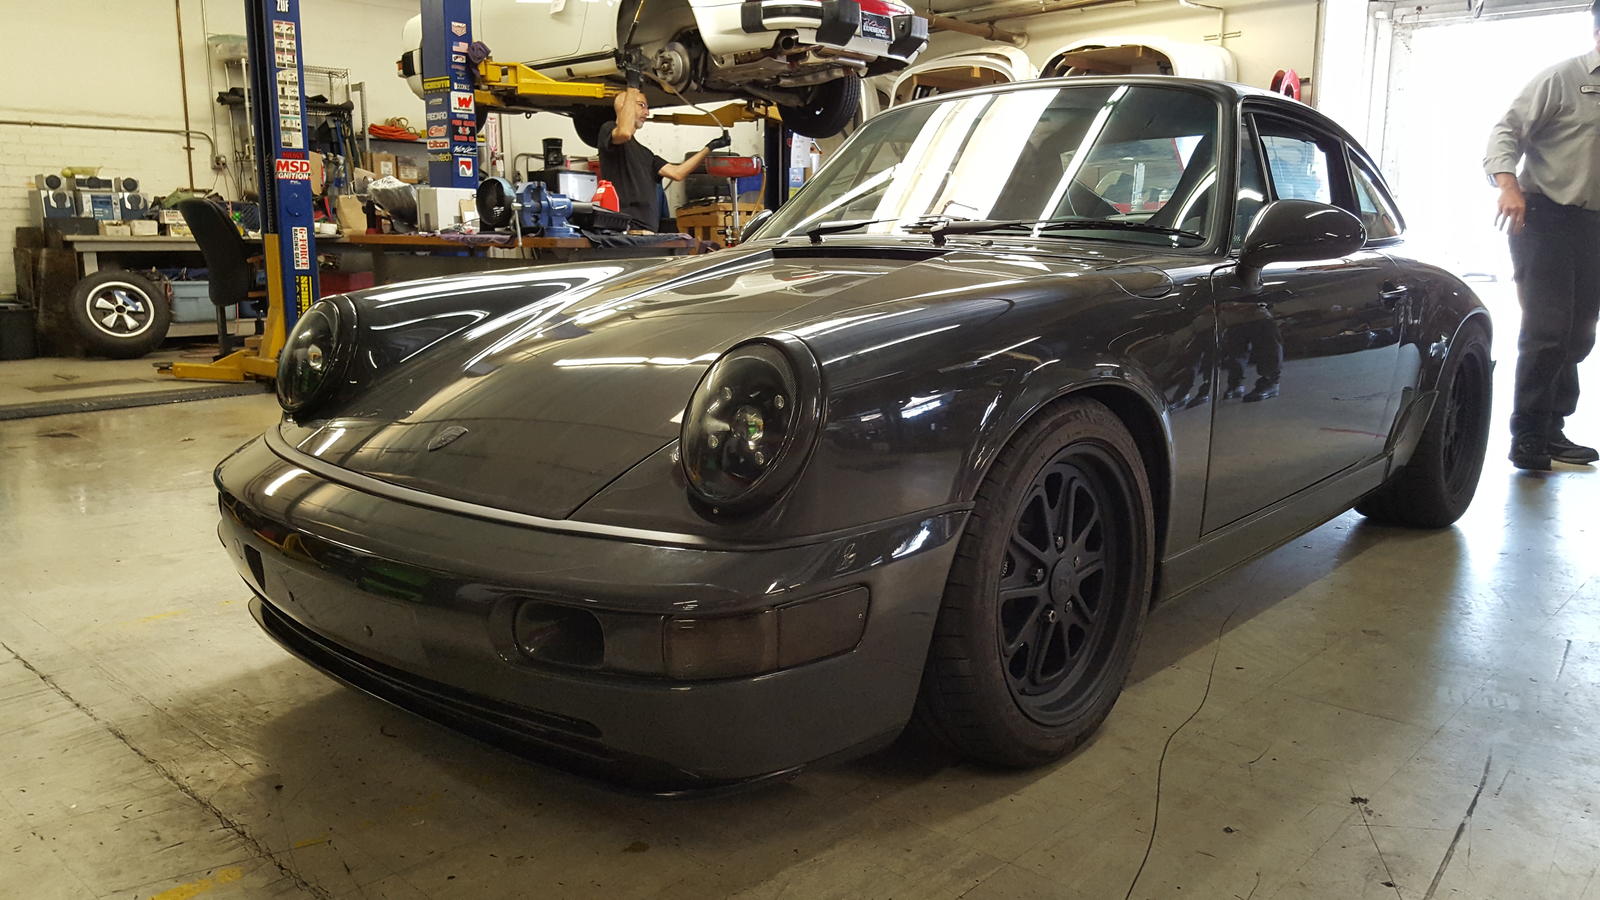 Gray Gunmetal Gray Or Slate Gray. car paint that changes color in light 964...